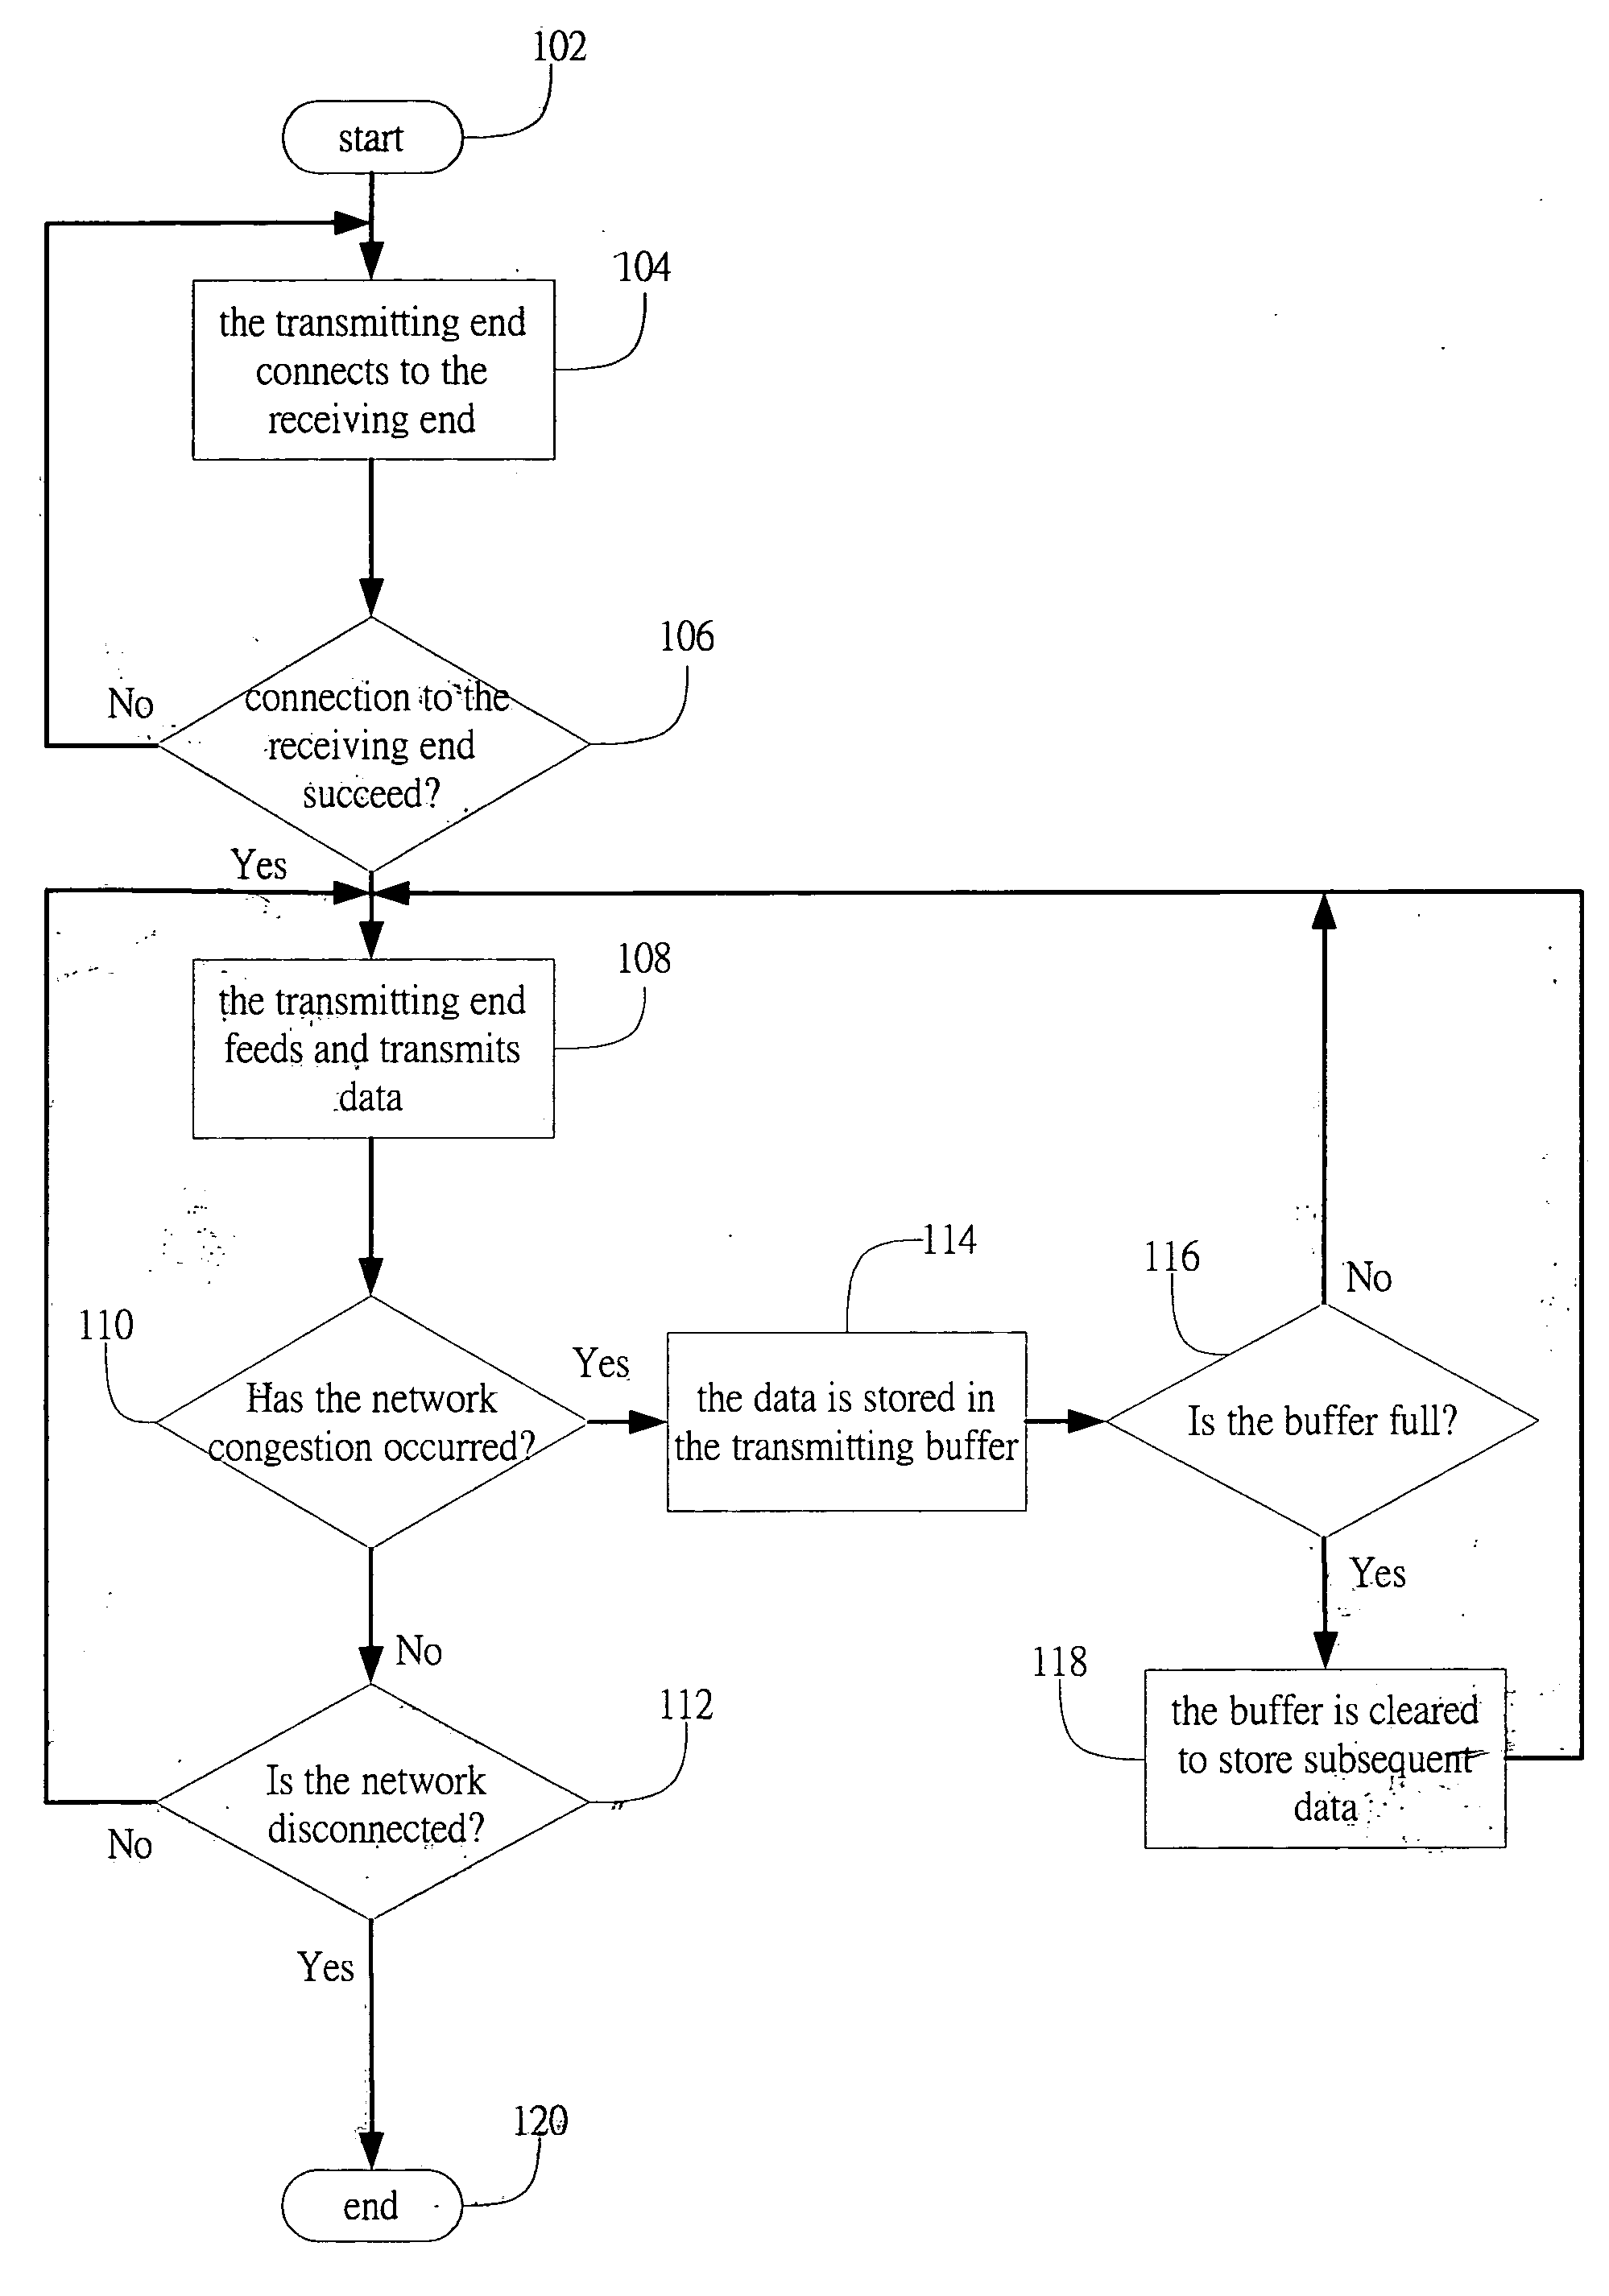 Real-time and reliable method for transporting data